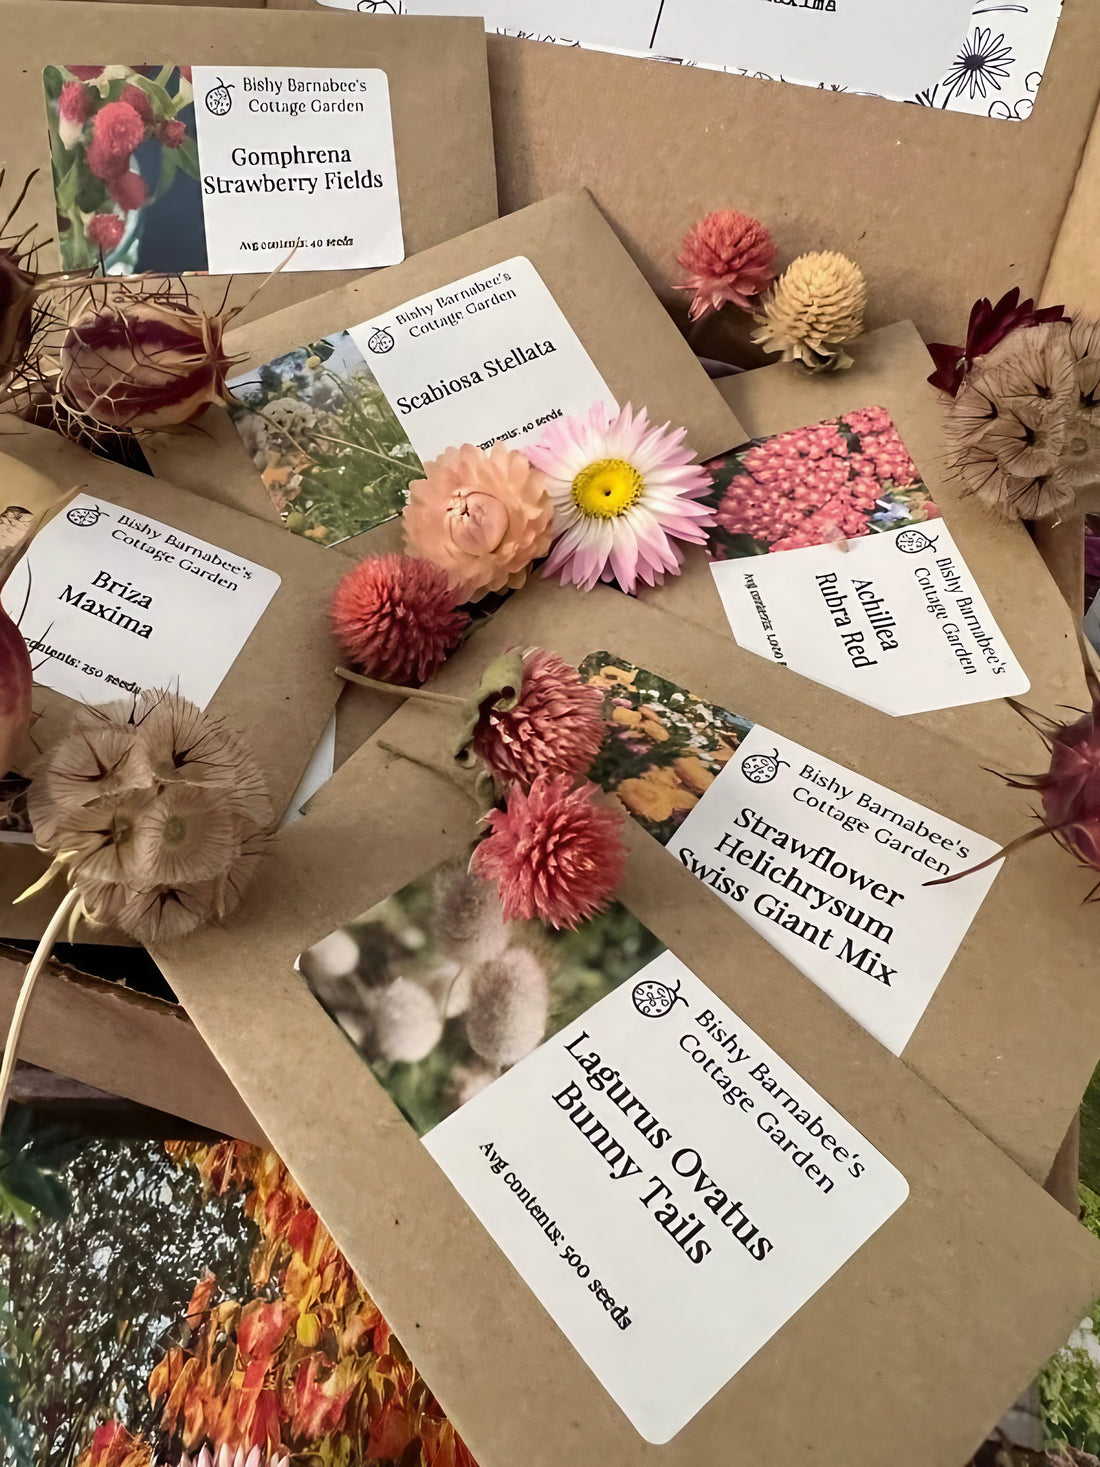 Variety of flowers seeds displayed on for a flower drying hobby kit